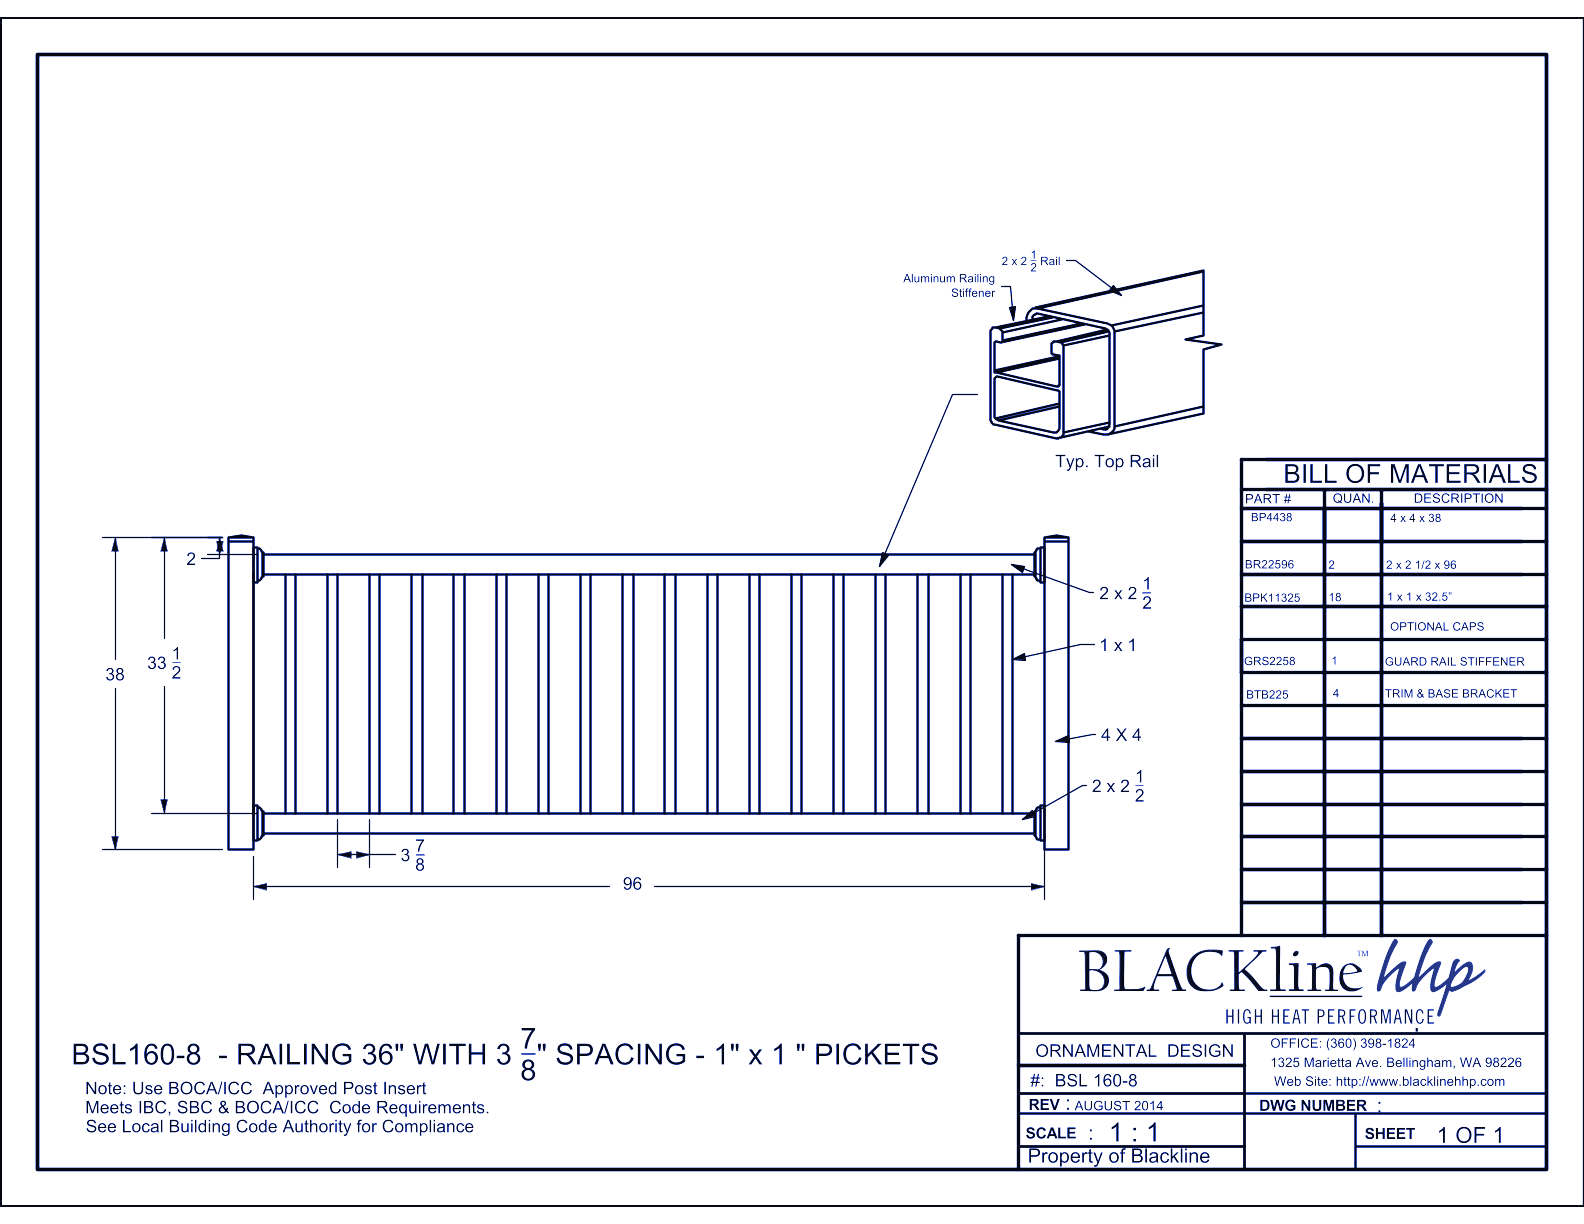 BSL160-8: Railing 36" with 3 7/8" Spacing - 1" x 1" Pickets